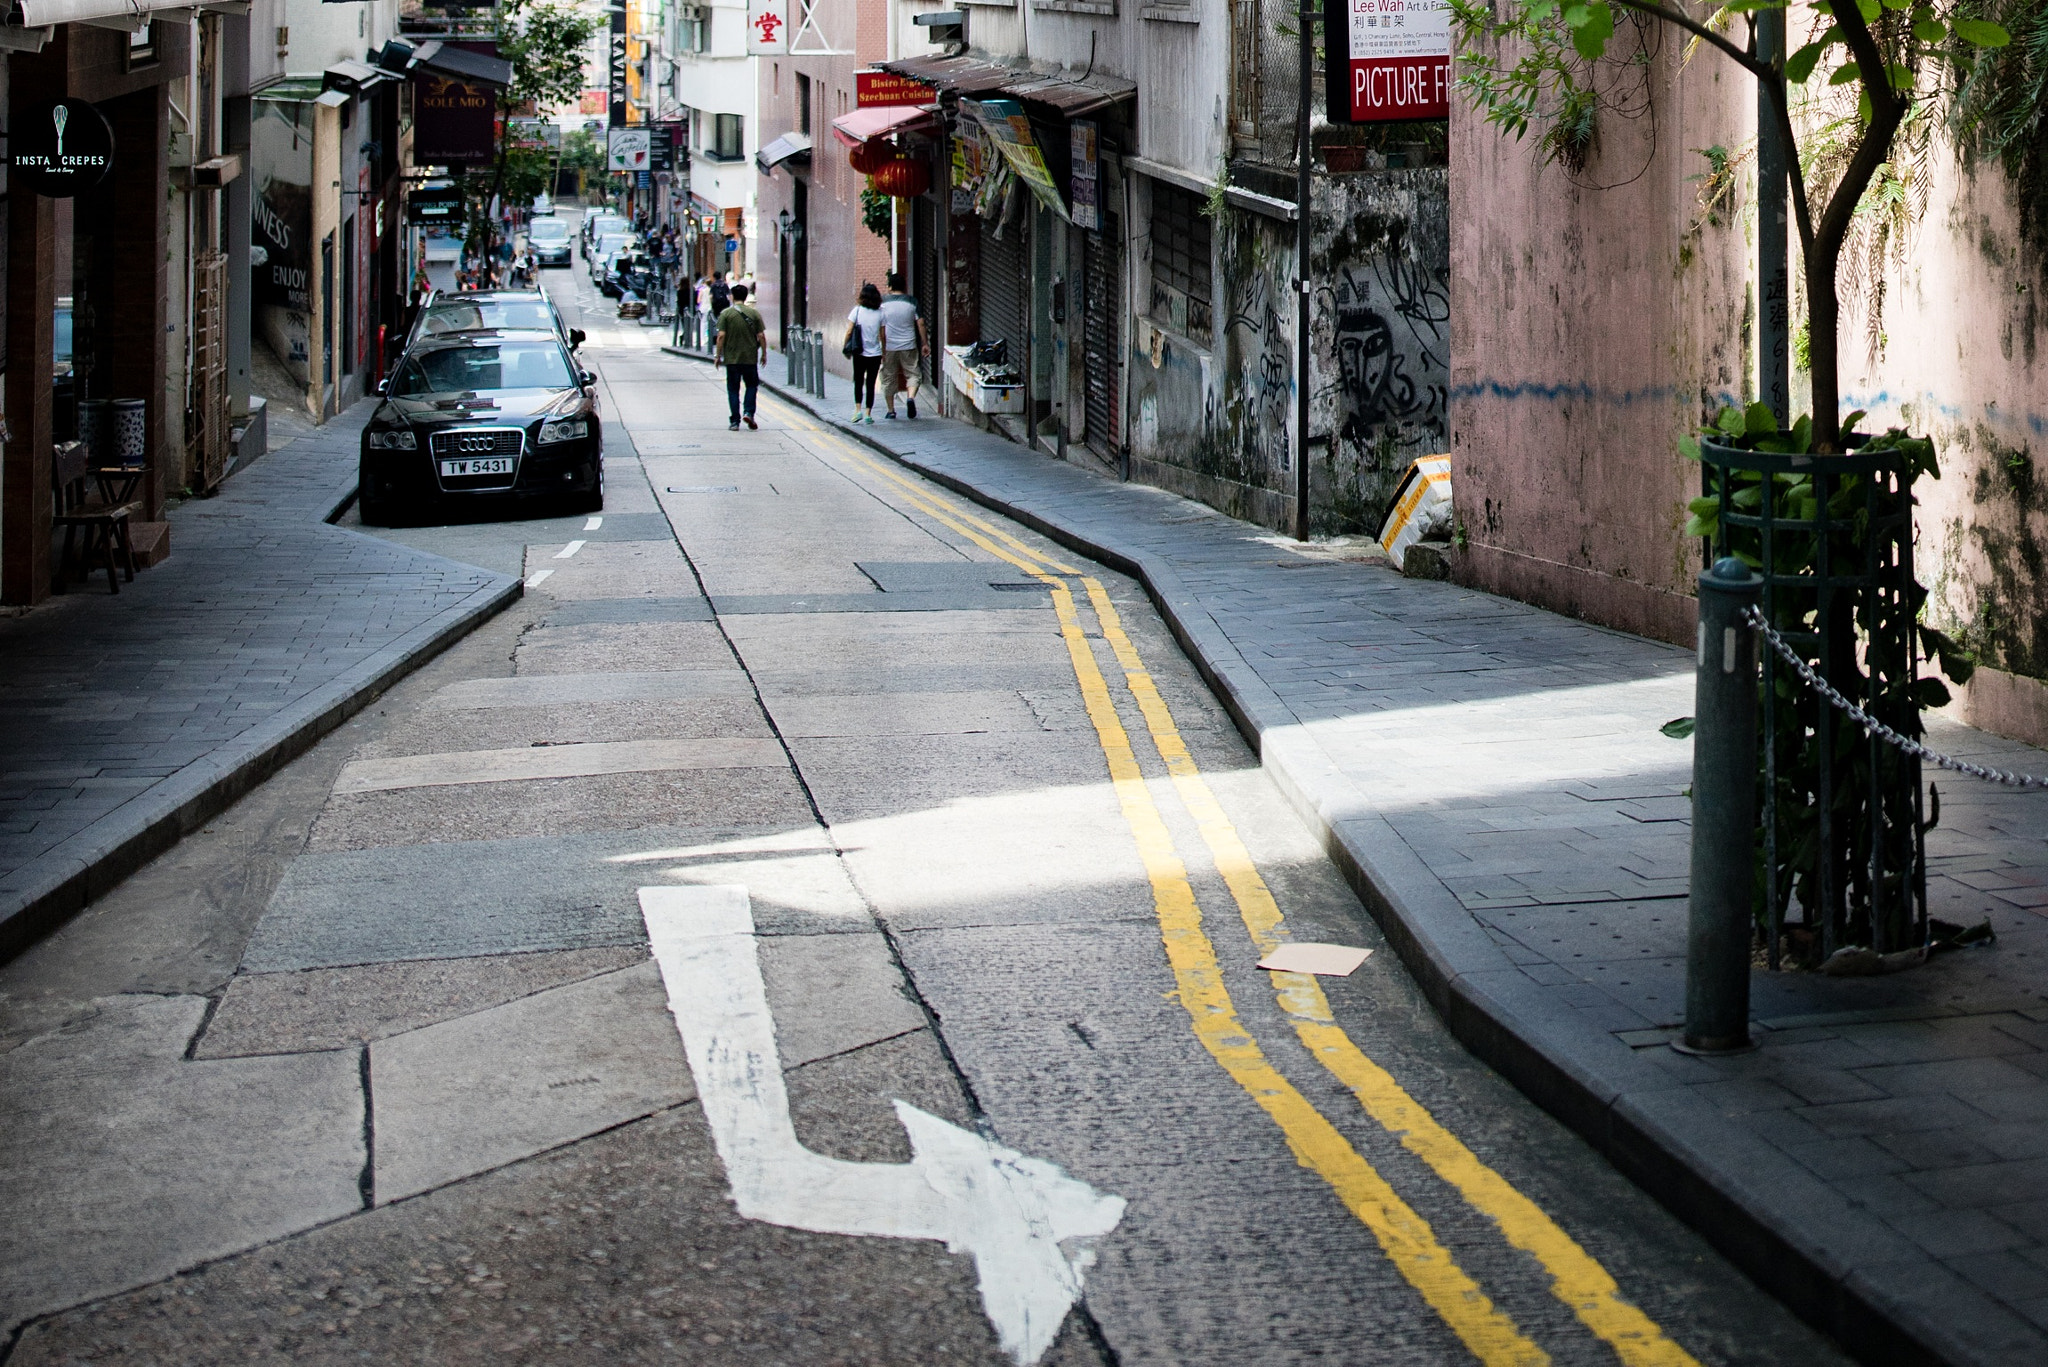 Sony a7 sample photo. Hongkong is turning left photography